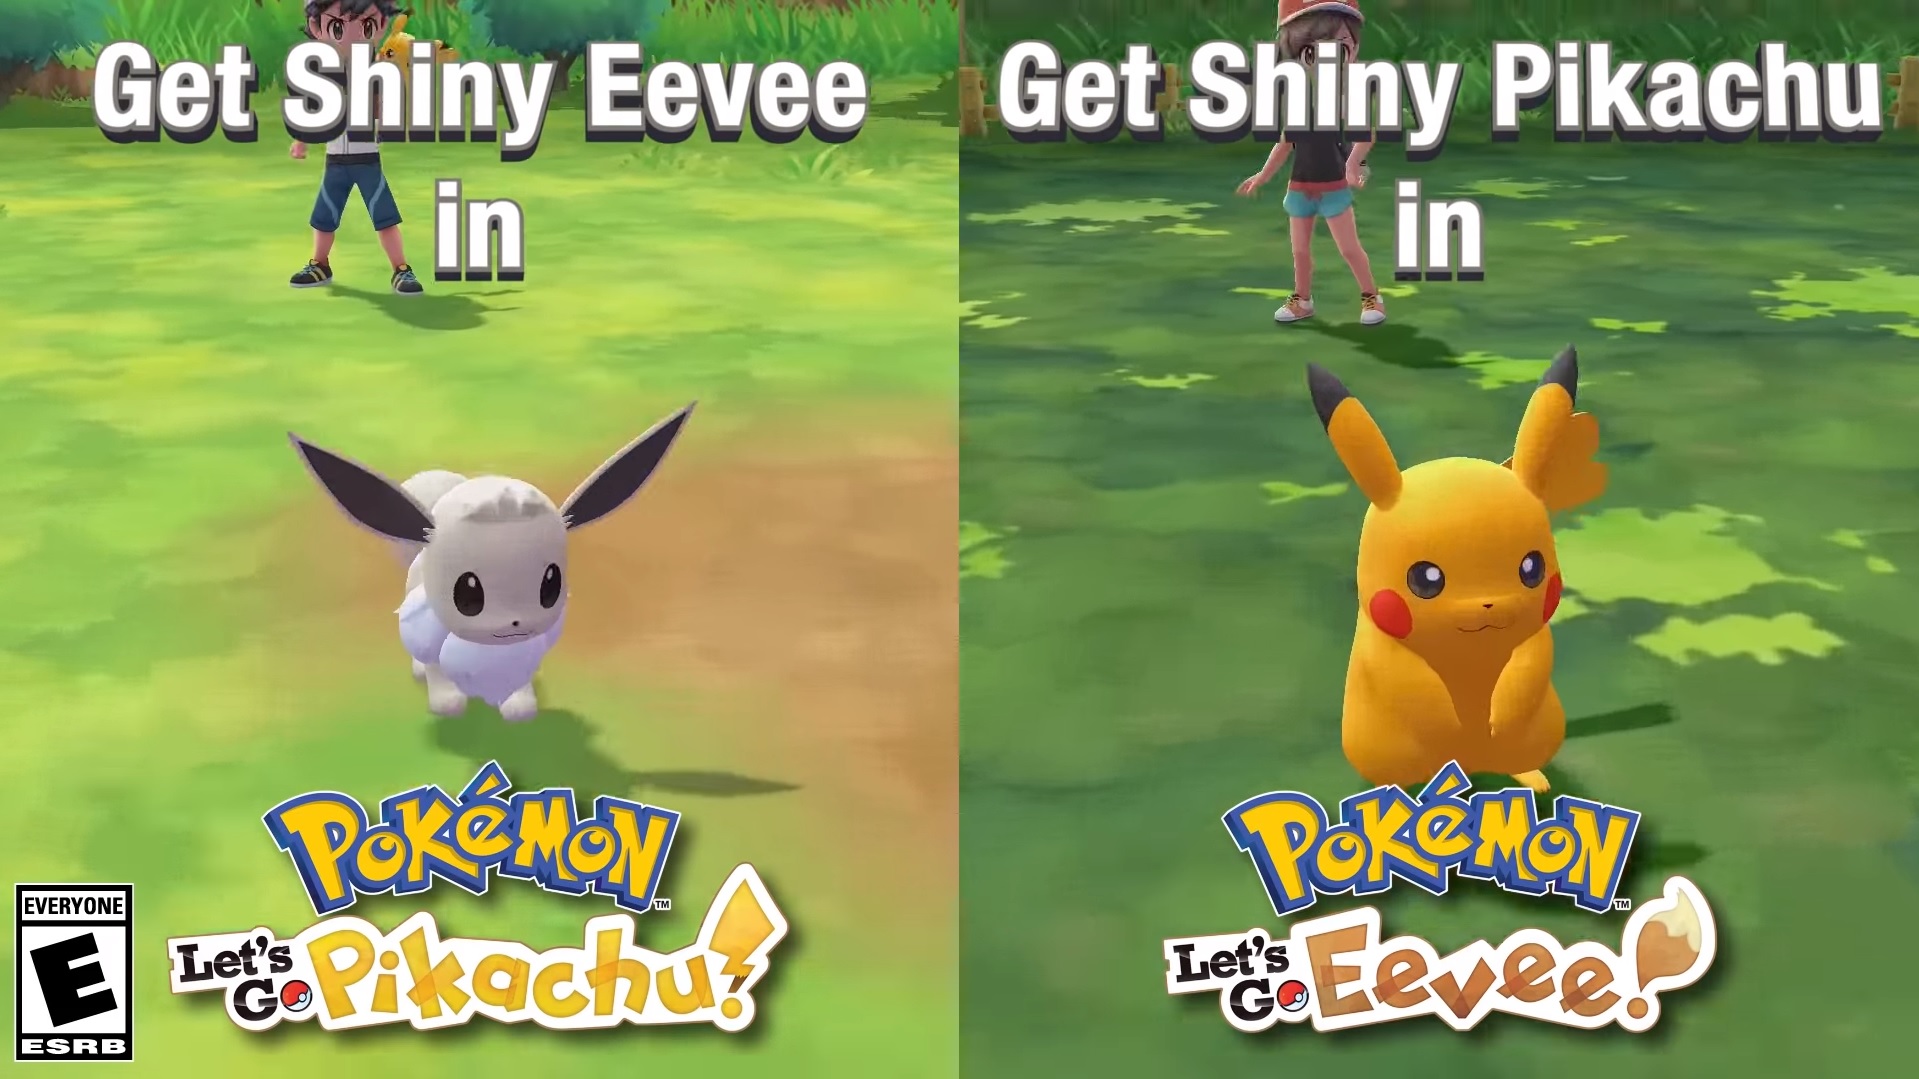 Pokémon Pass app explained  distribution date and how to claim the Shiny Pikachu and Shiny Eevee in Lets Go